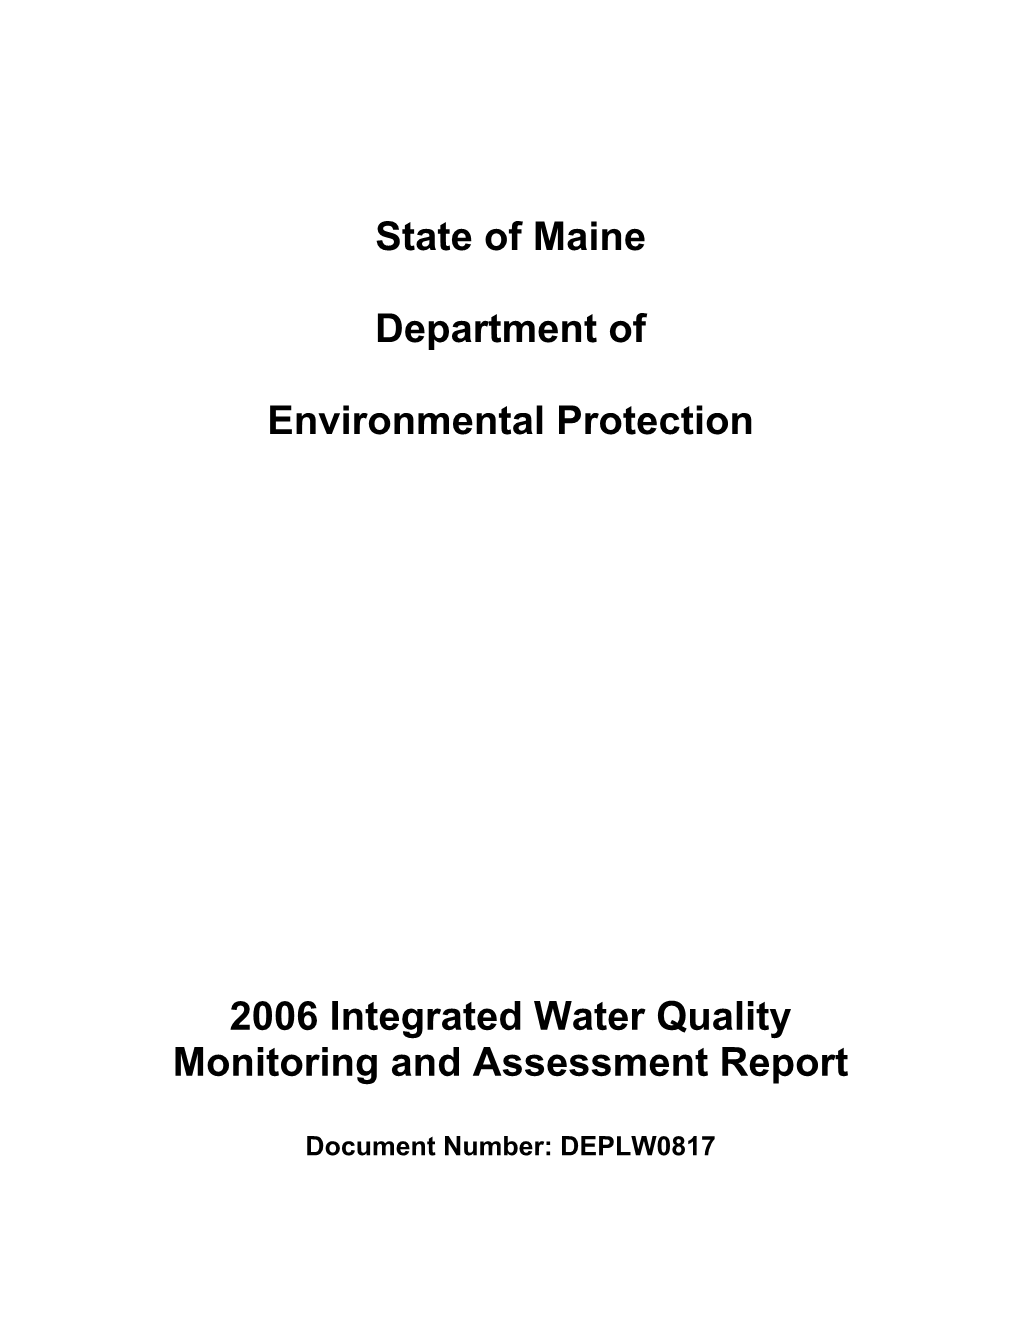 State of Maine Department of Environmental Protection 2006